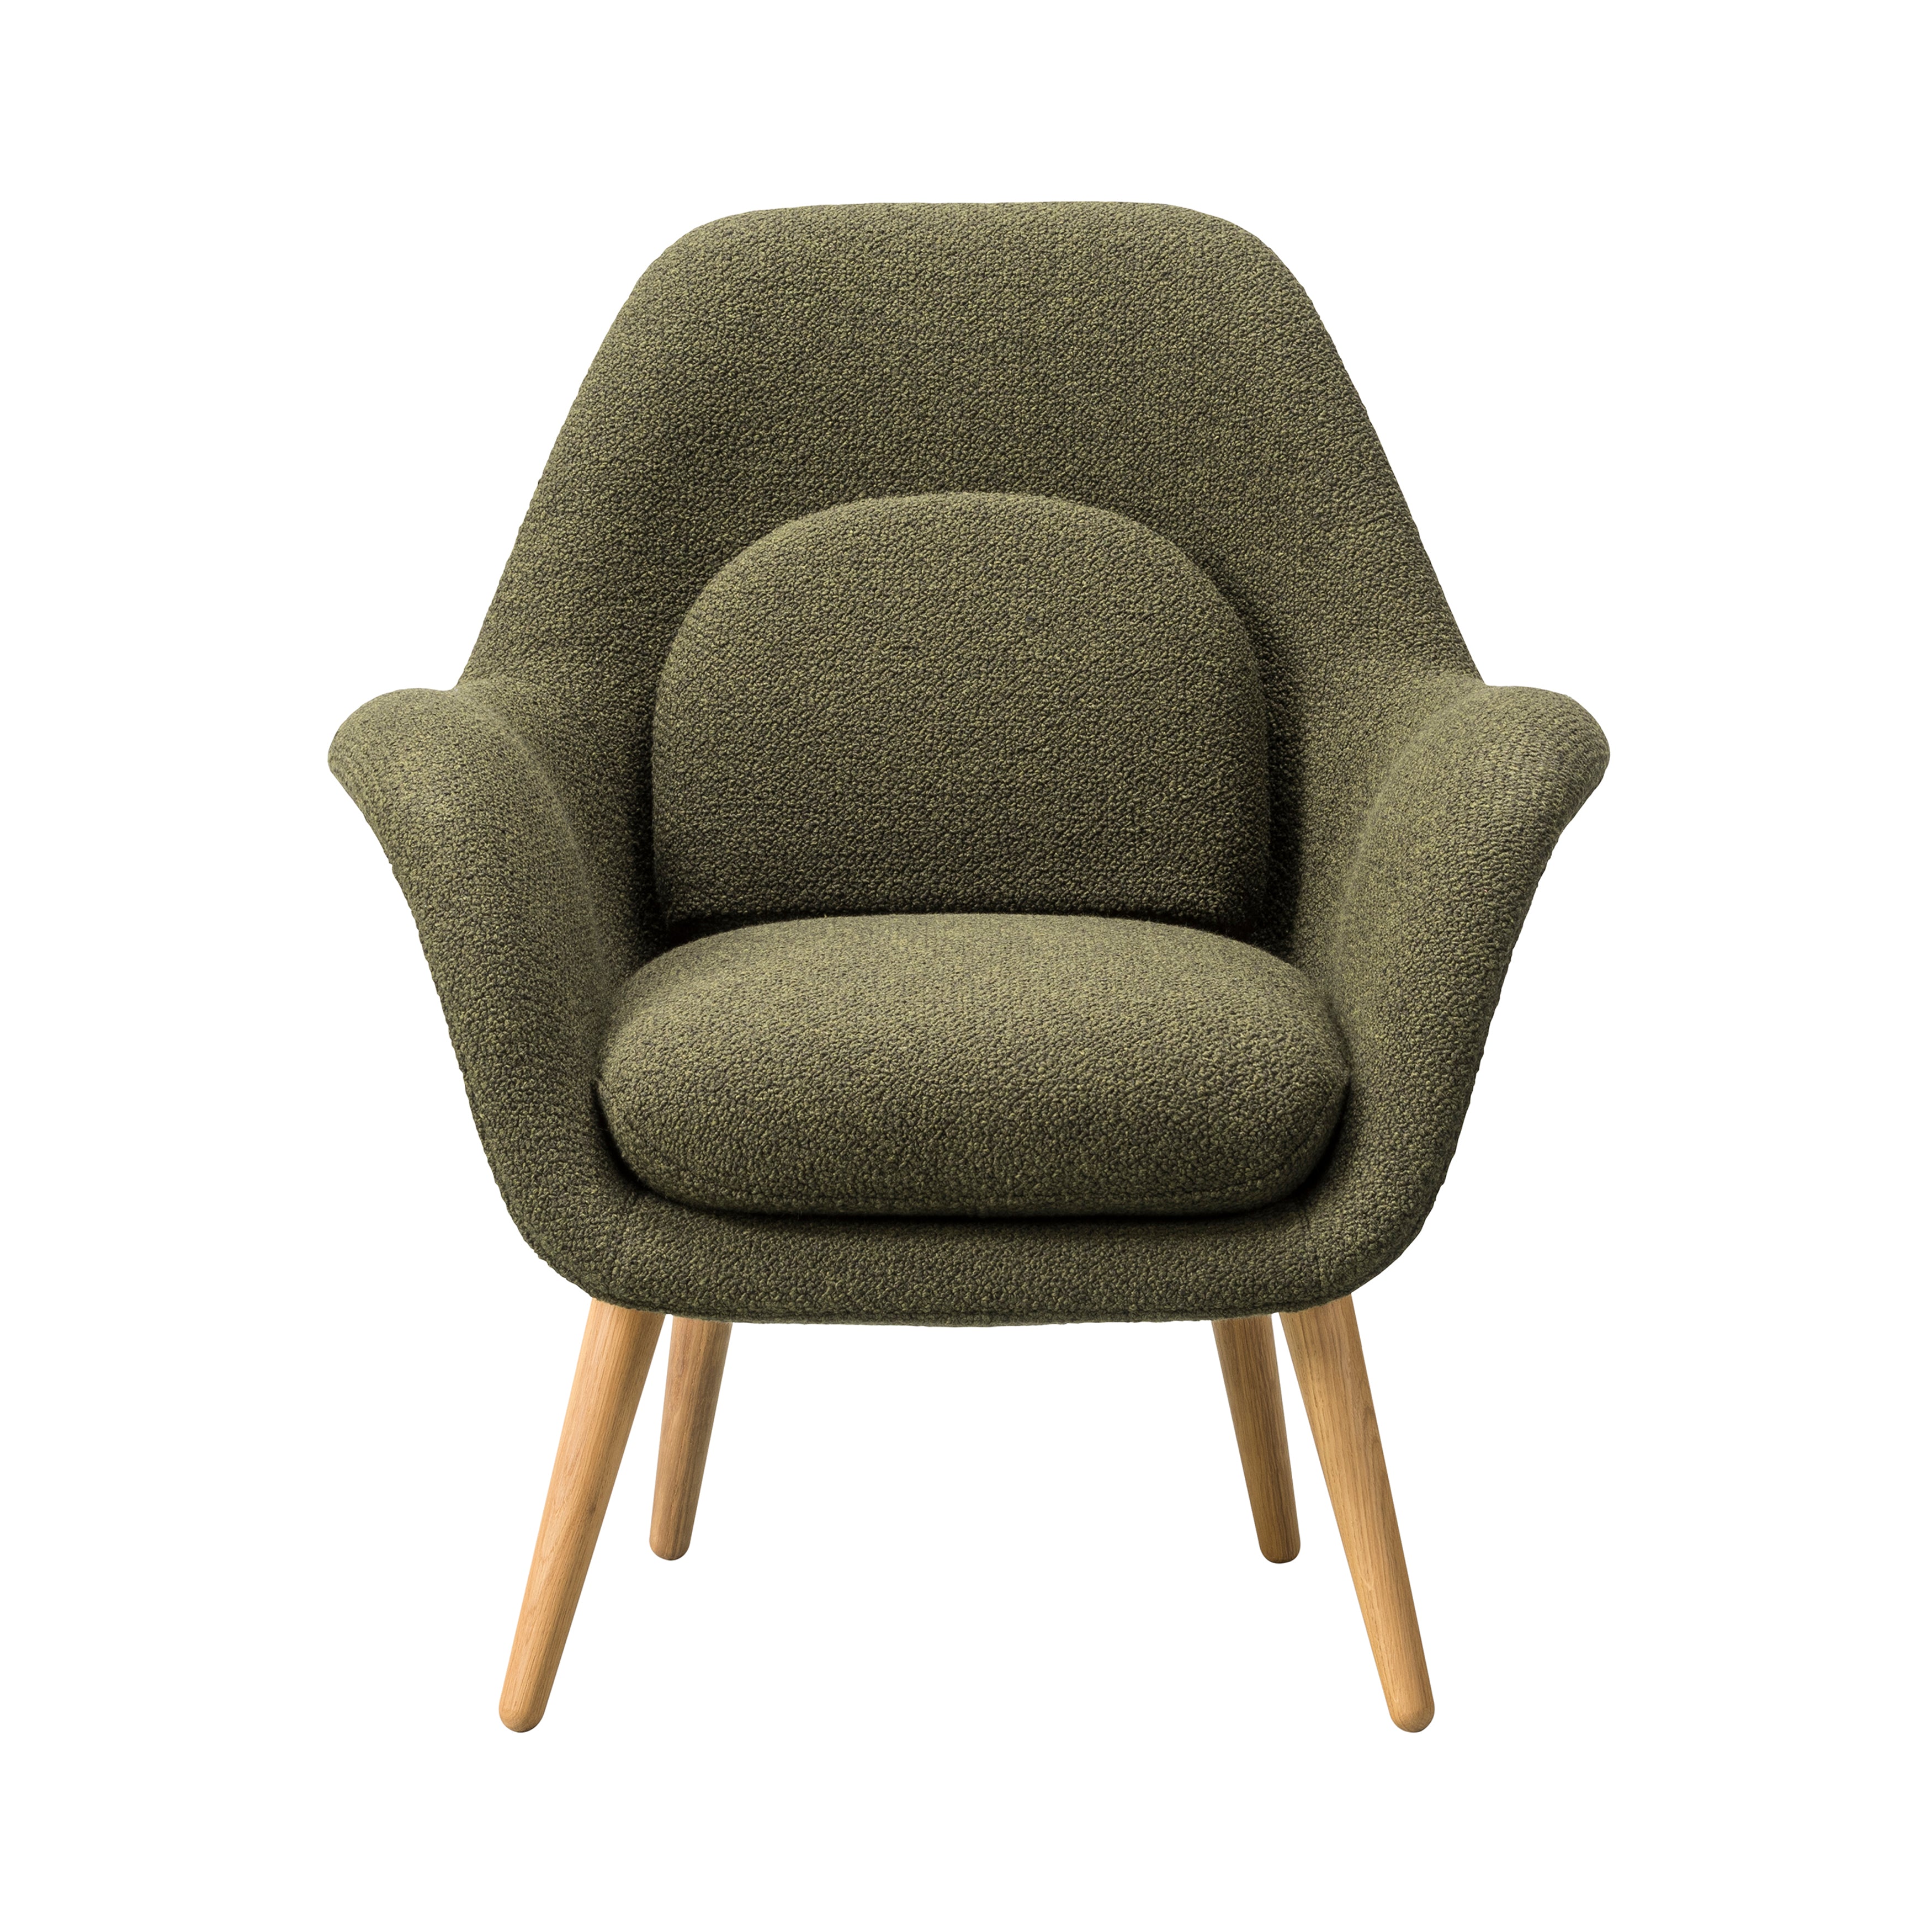 Swoon Lounge Chair Petit: Wood Base + Lacquered Oak